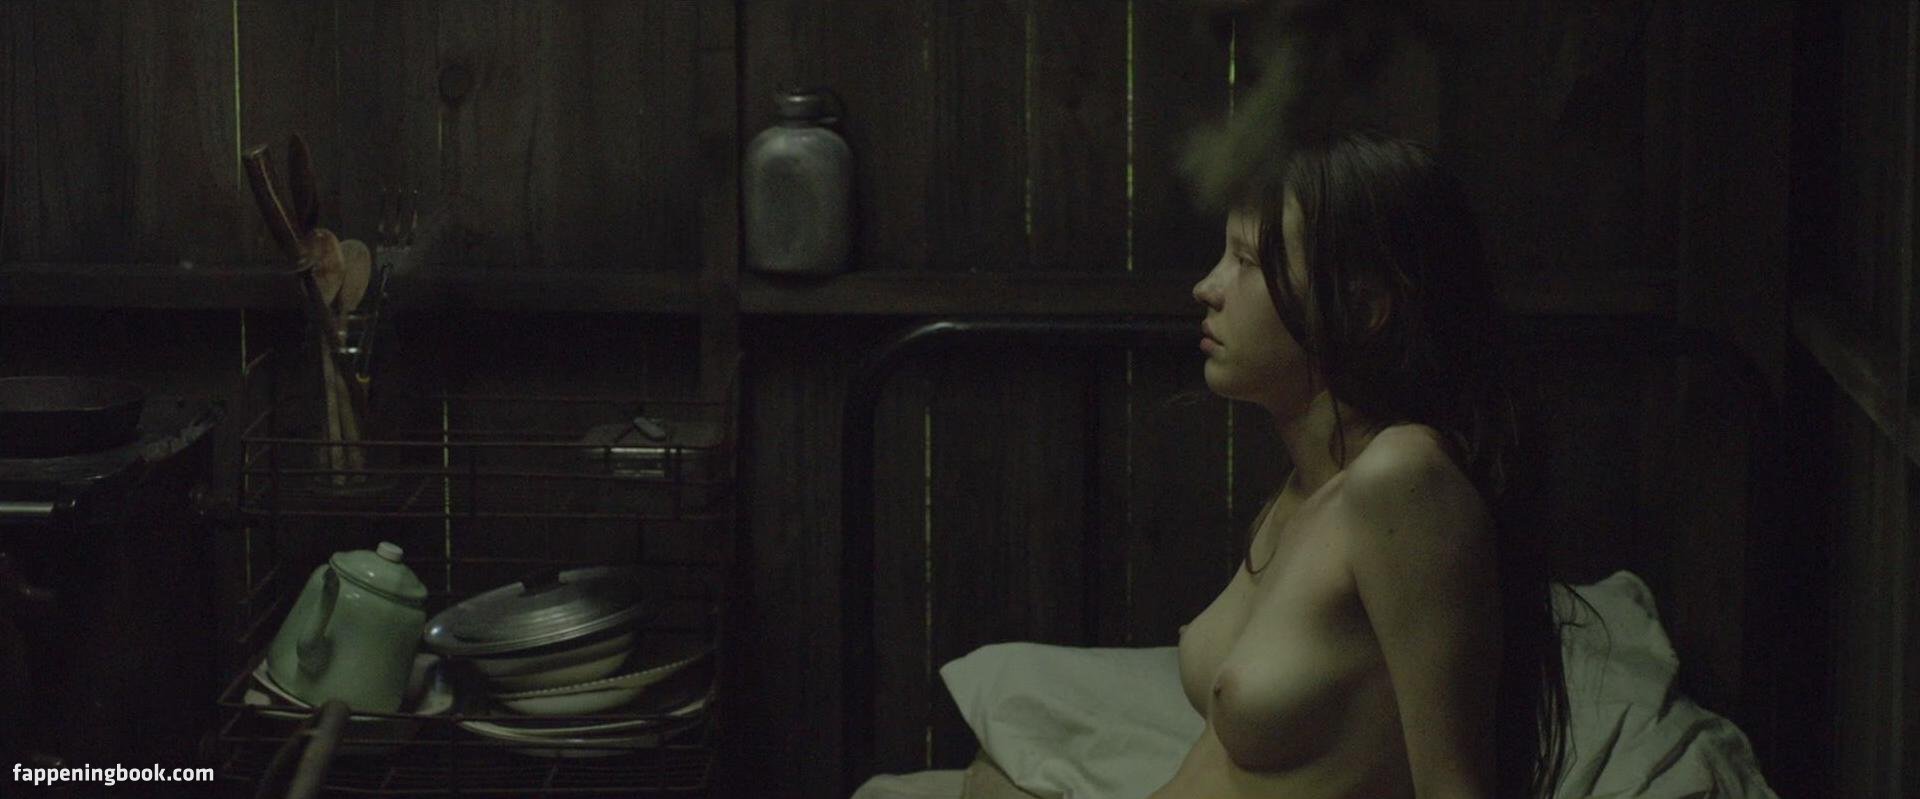 Mia Goth Nude, The Fappening - Photo #383921 - FappeningBook.